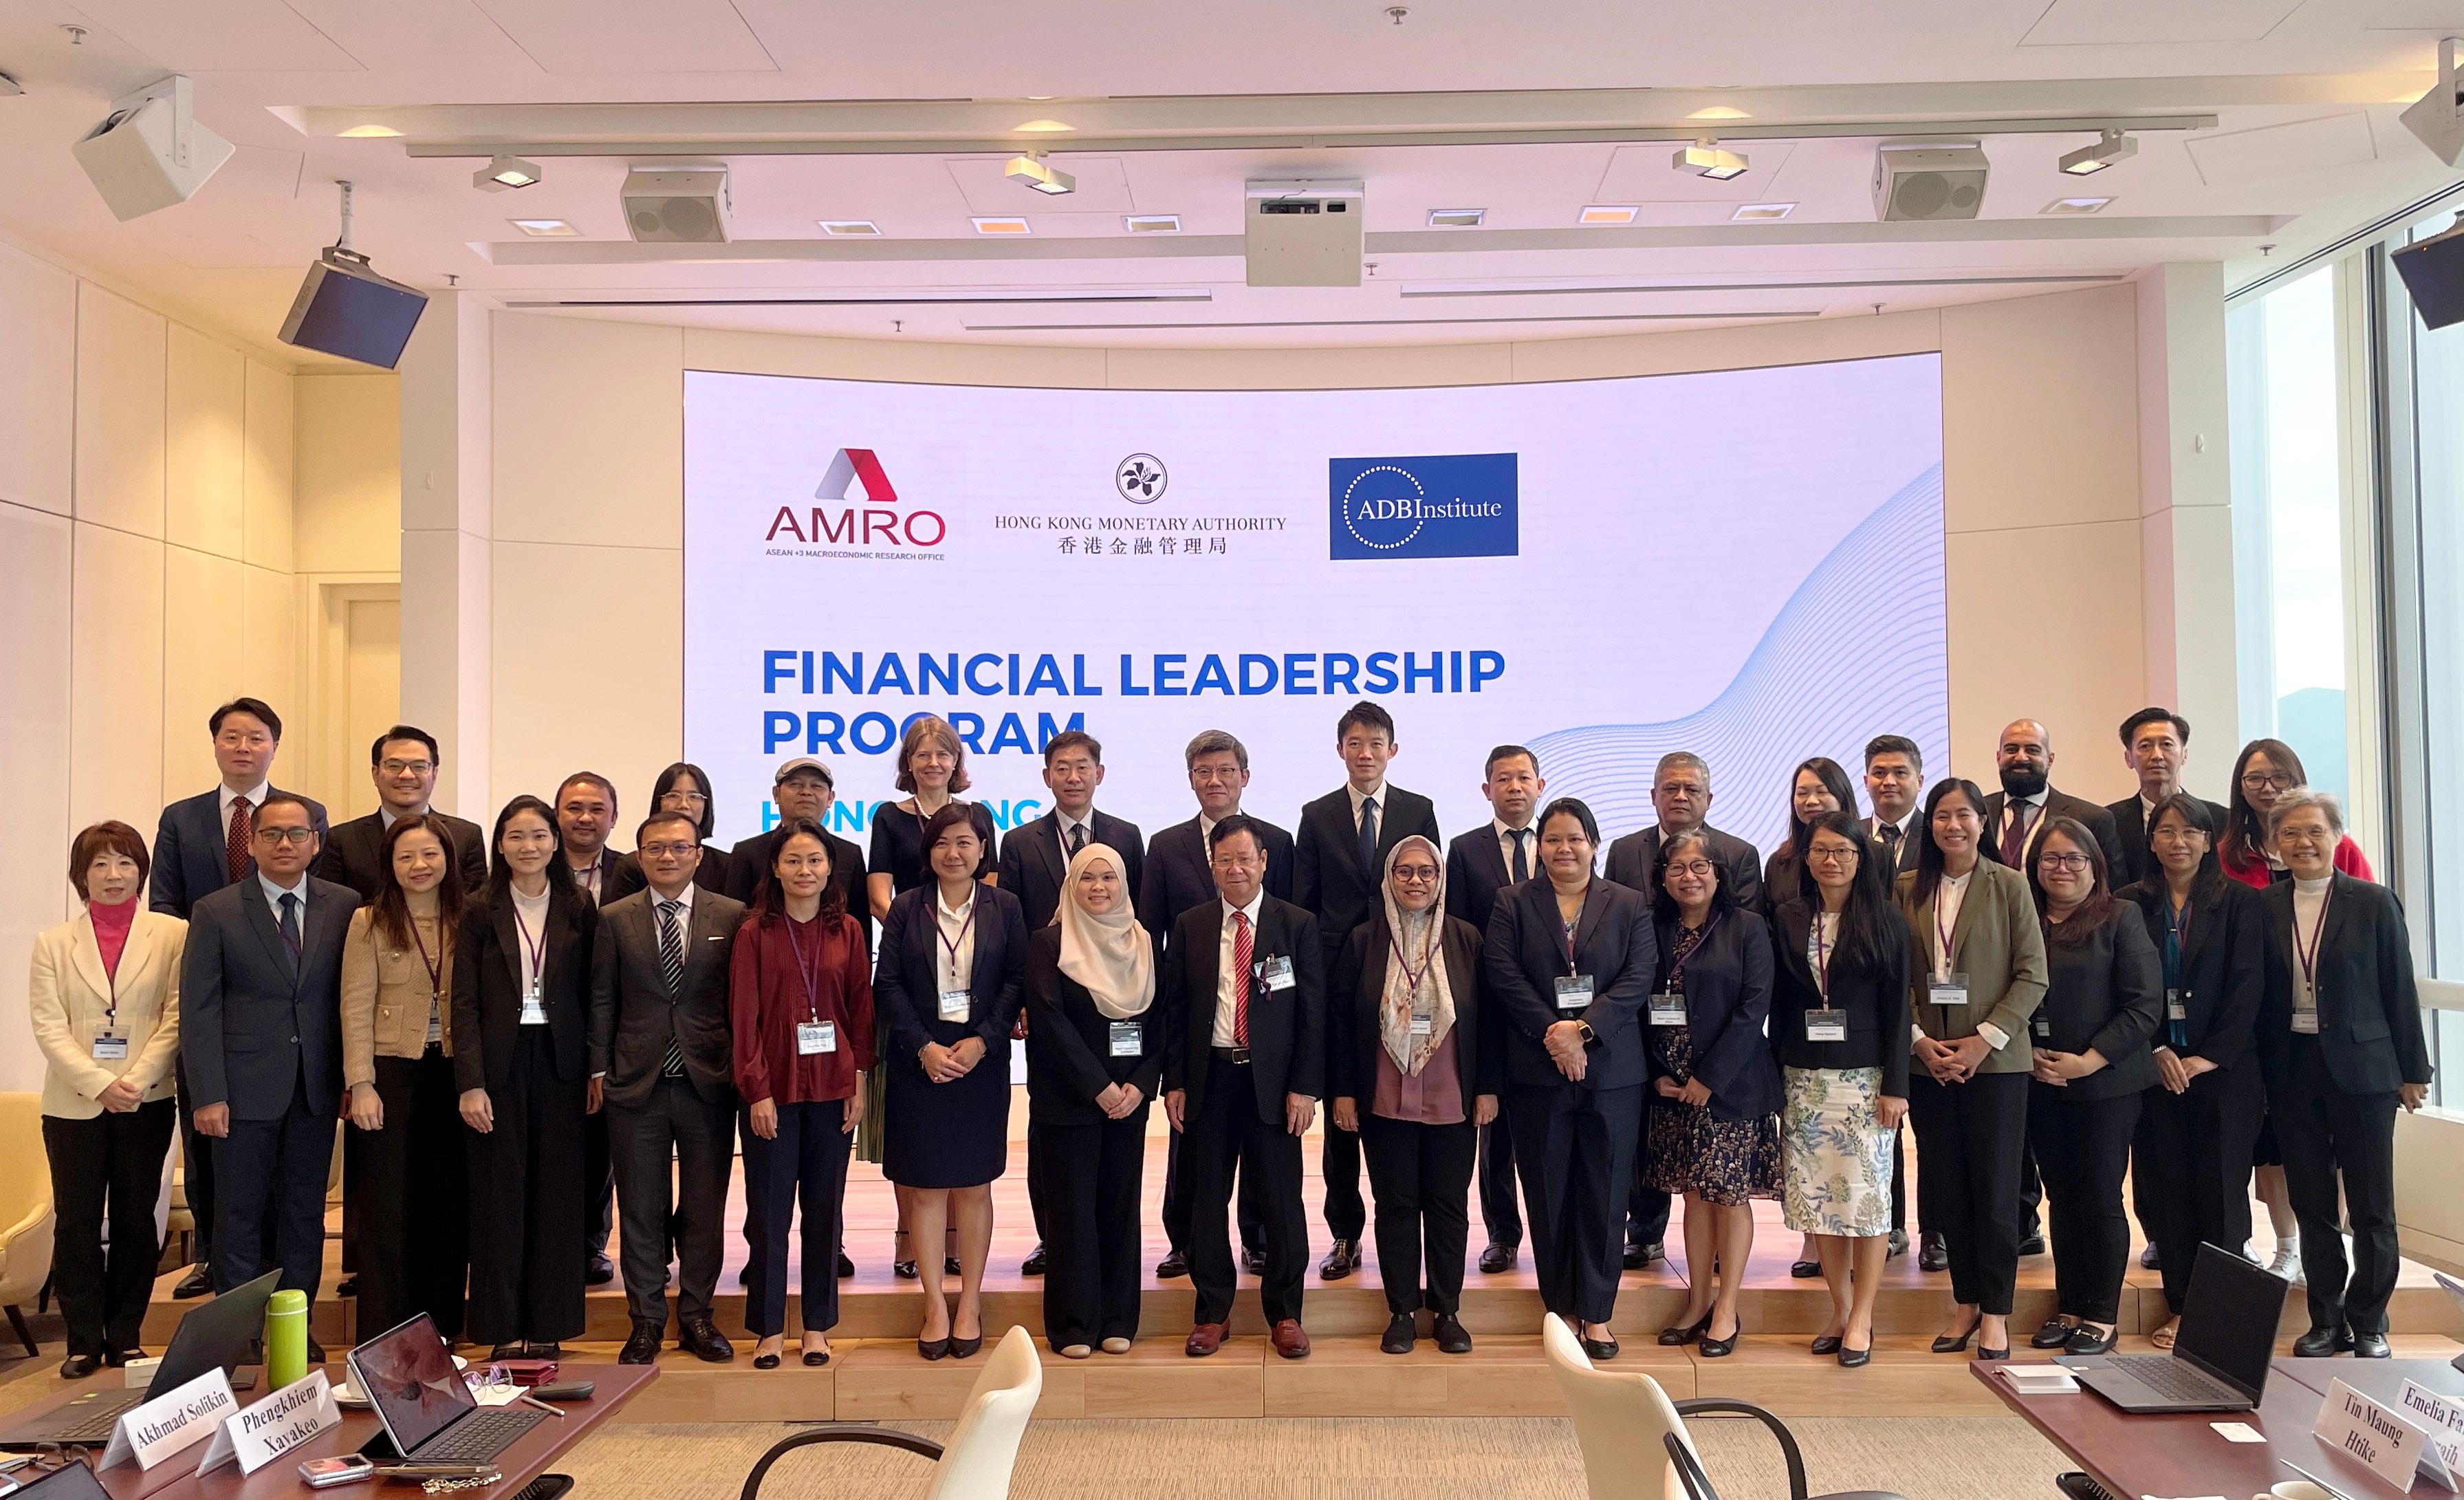 About 30 participants comprising senior representatives from central banks, ministries of finance and related government agencies of Brunei Darussalam, Cambodia, Indonesia, Laos, Malaysia, Myanmar, the Philippines, Singapore, Thailand and Vietnam attended the Financial Leadership Training Program in Hong Kong from December 11 to 14.